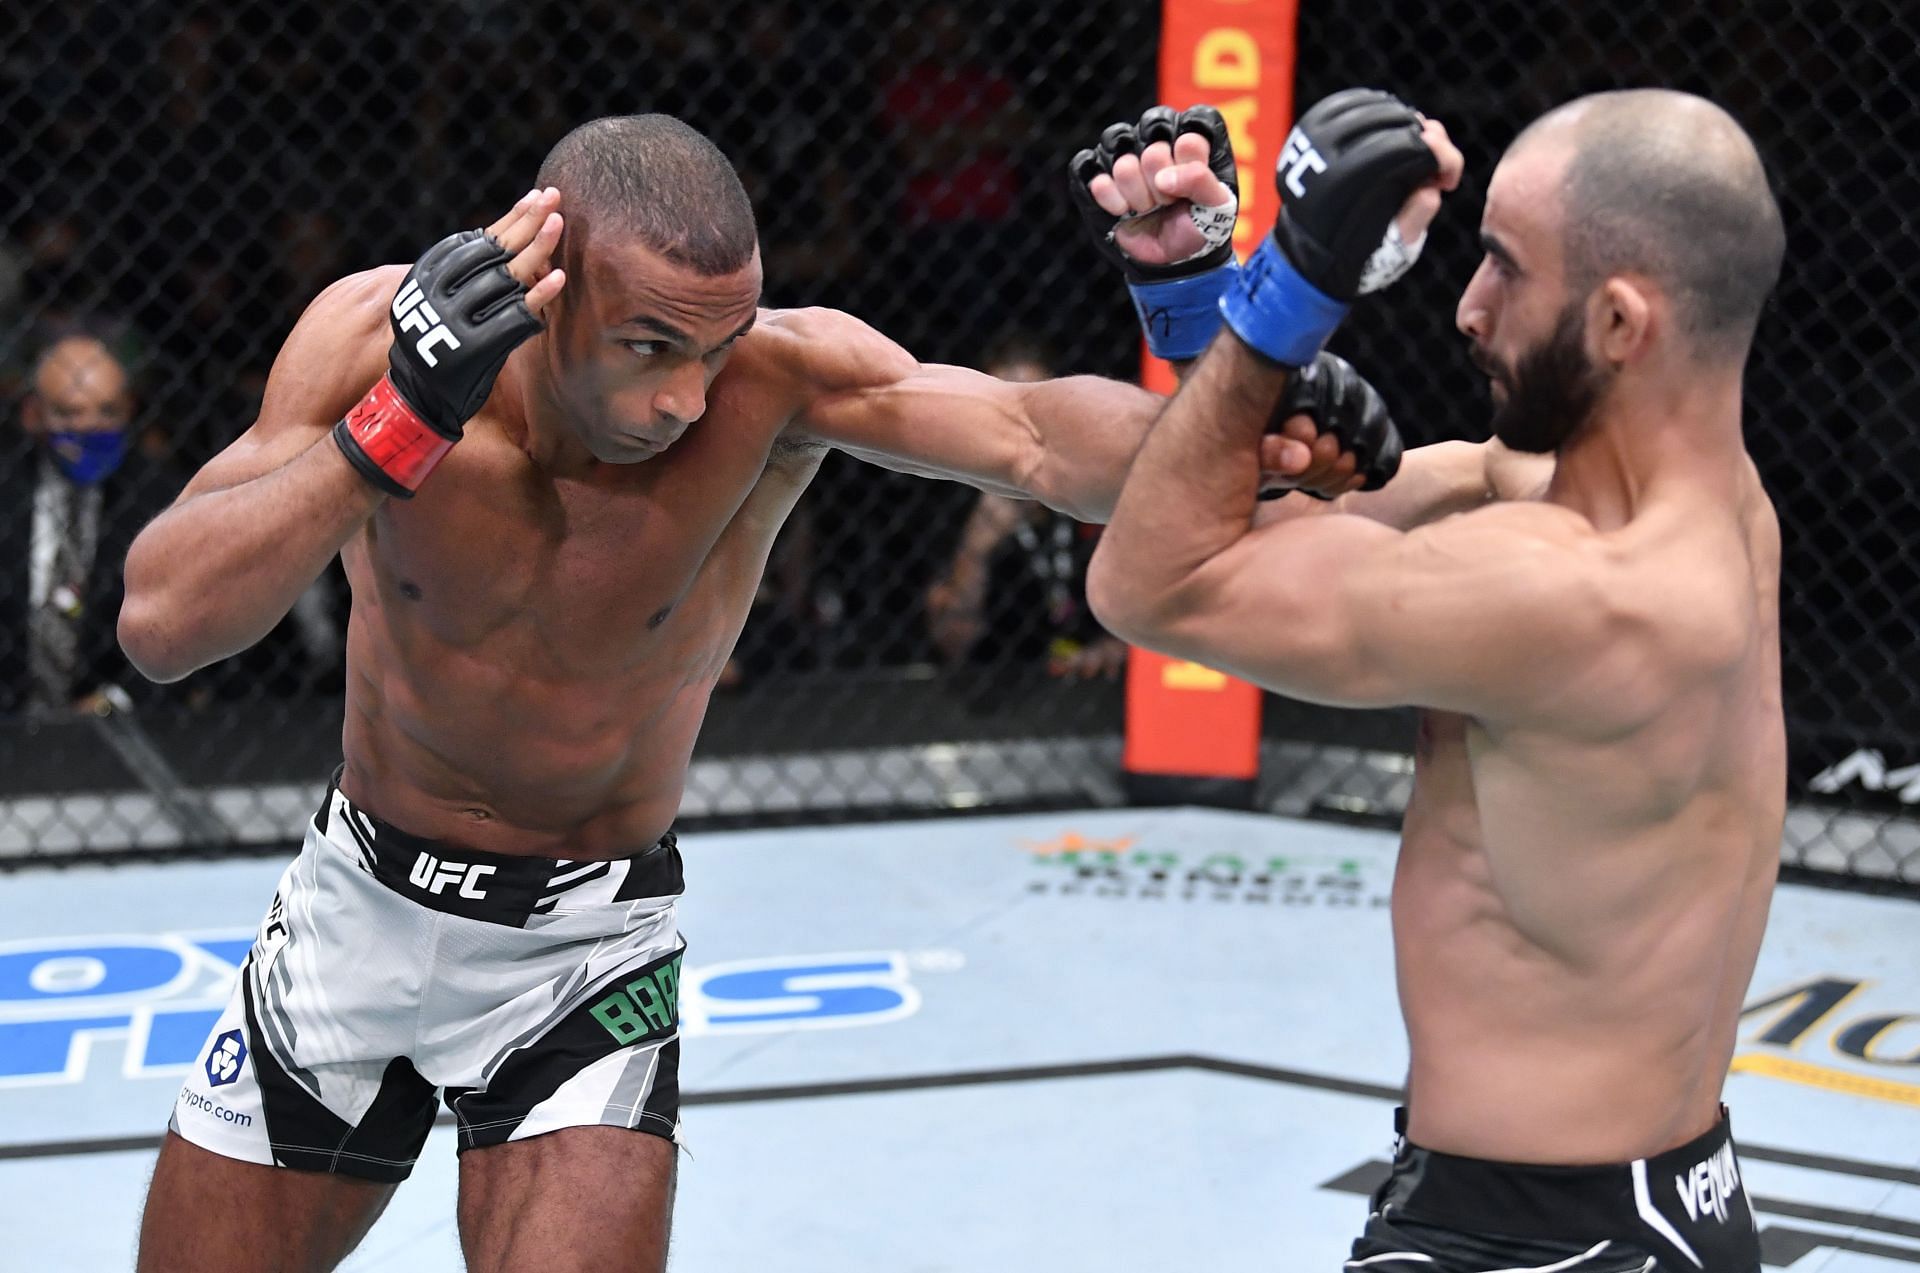 Edson Barboza remains dangerous for any opponent despite his advanced age